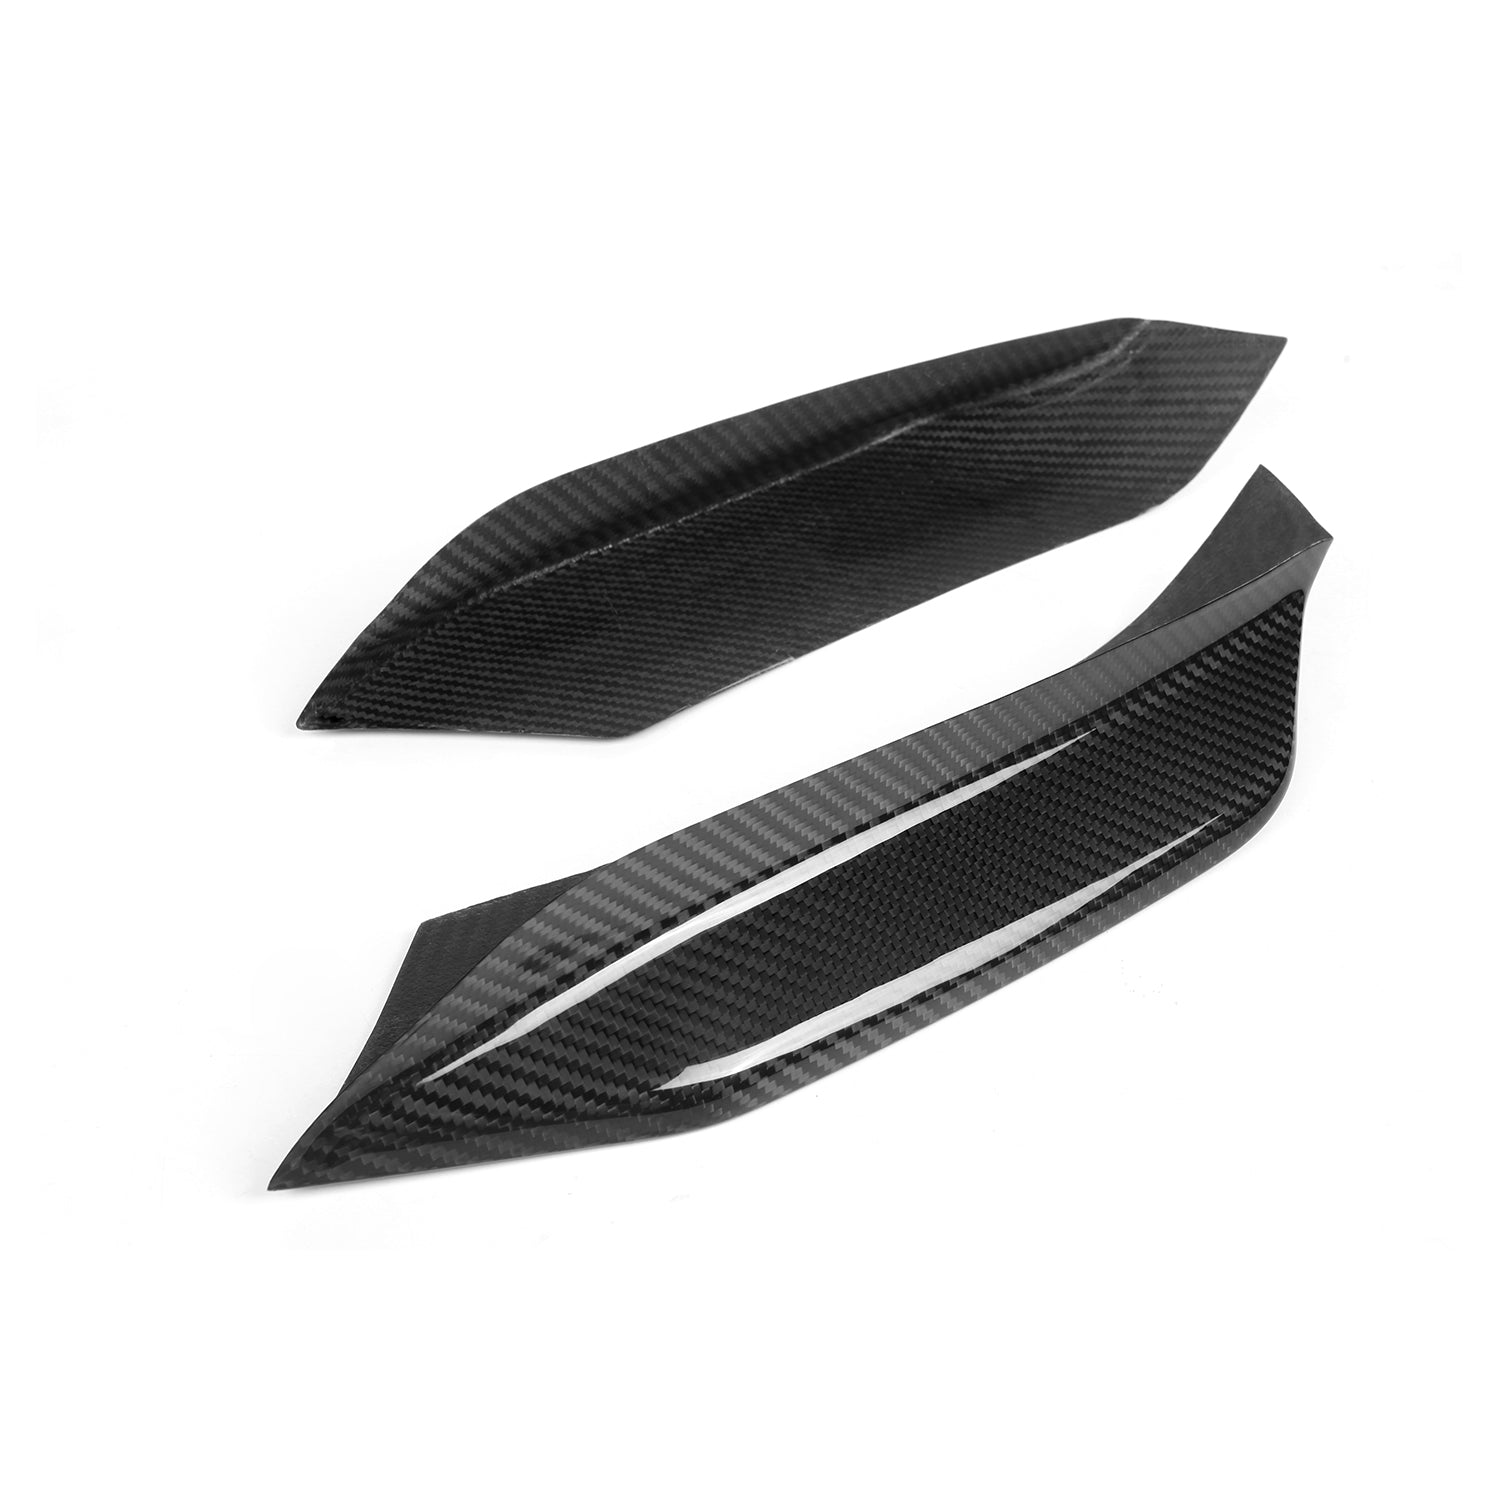 BMW F80 M3 And F82 M4 Carbon Fibre Front Bumper Inserts On White Background